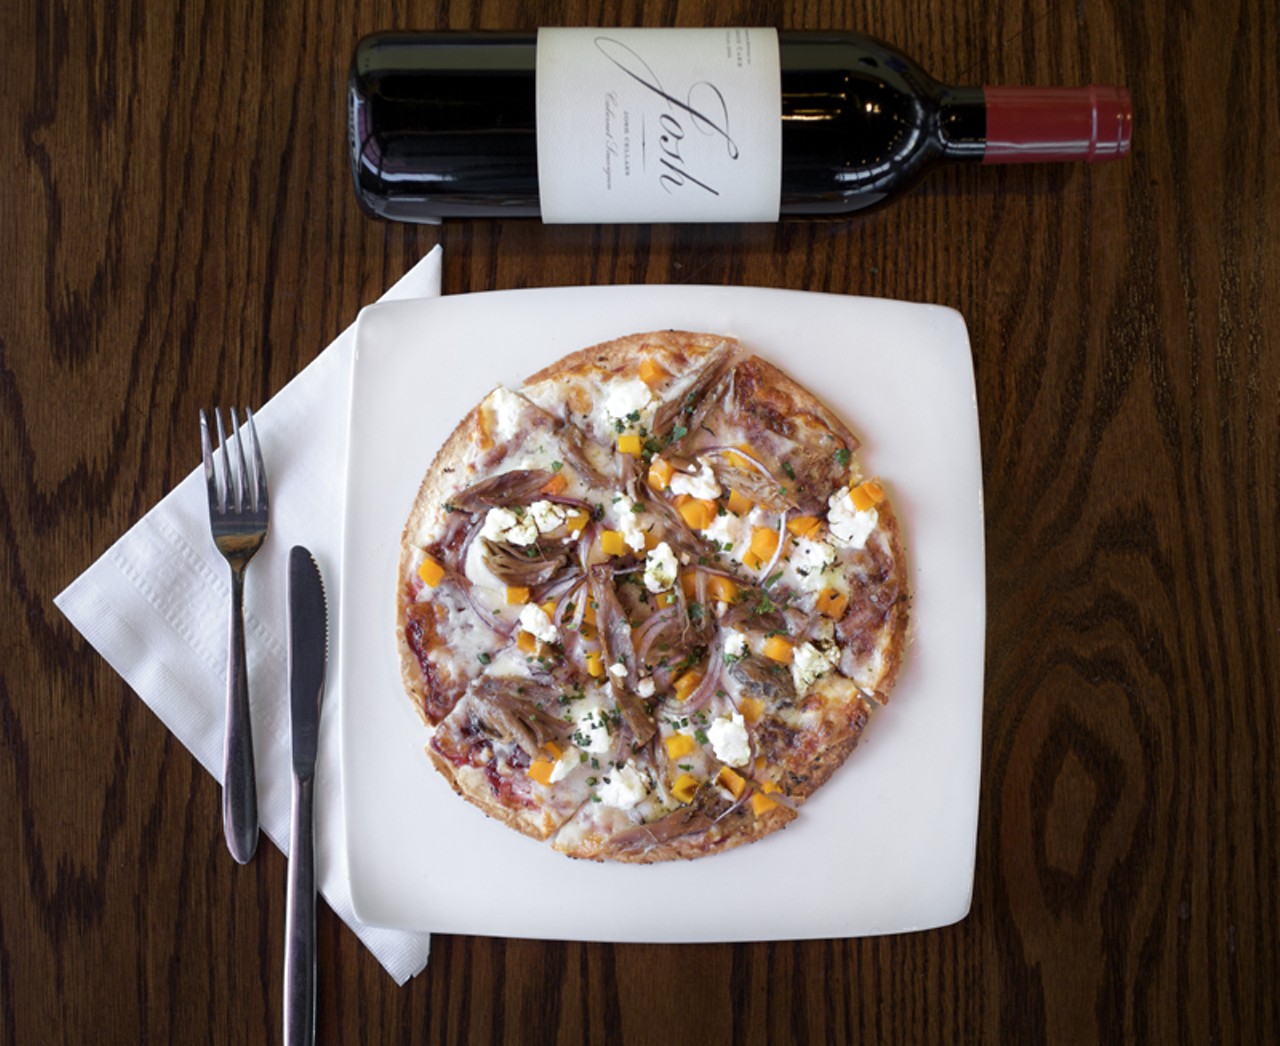 There are also four flatbreads featured on the menu, one of which is the Duck Confit Flatbread. It is made with a raspberry chipotle &ldquo;sauce,&rdquo; butternut squash and goat cheese. It is shown here with a Josh Cellars Cabernet Sauvignon.